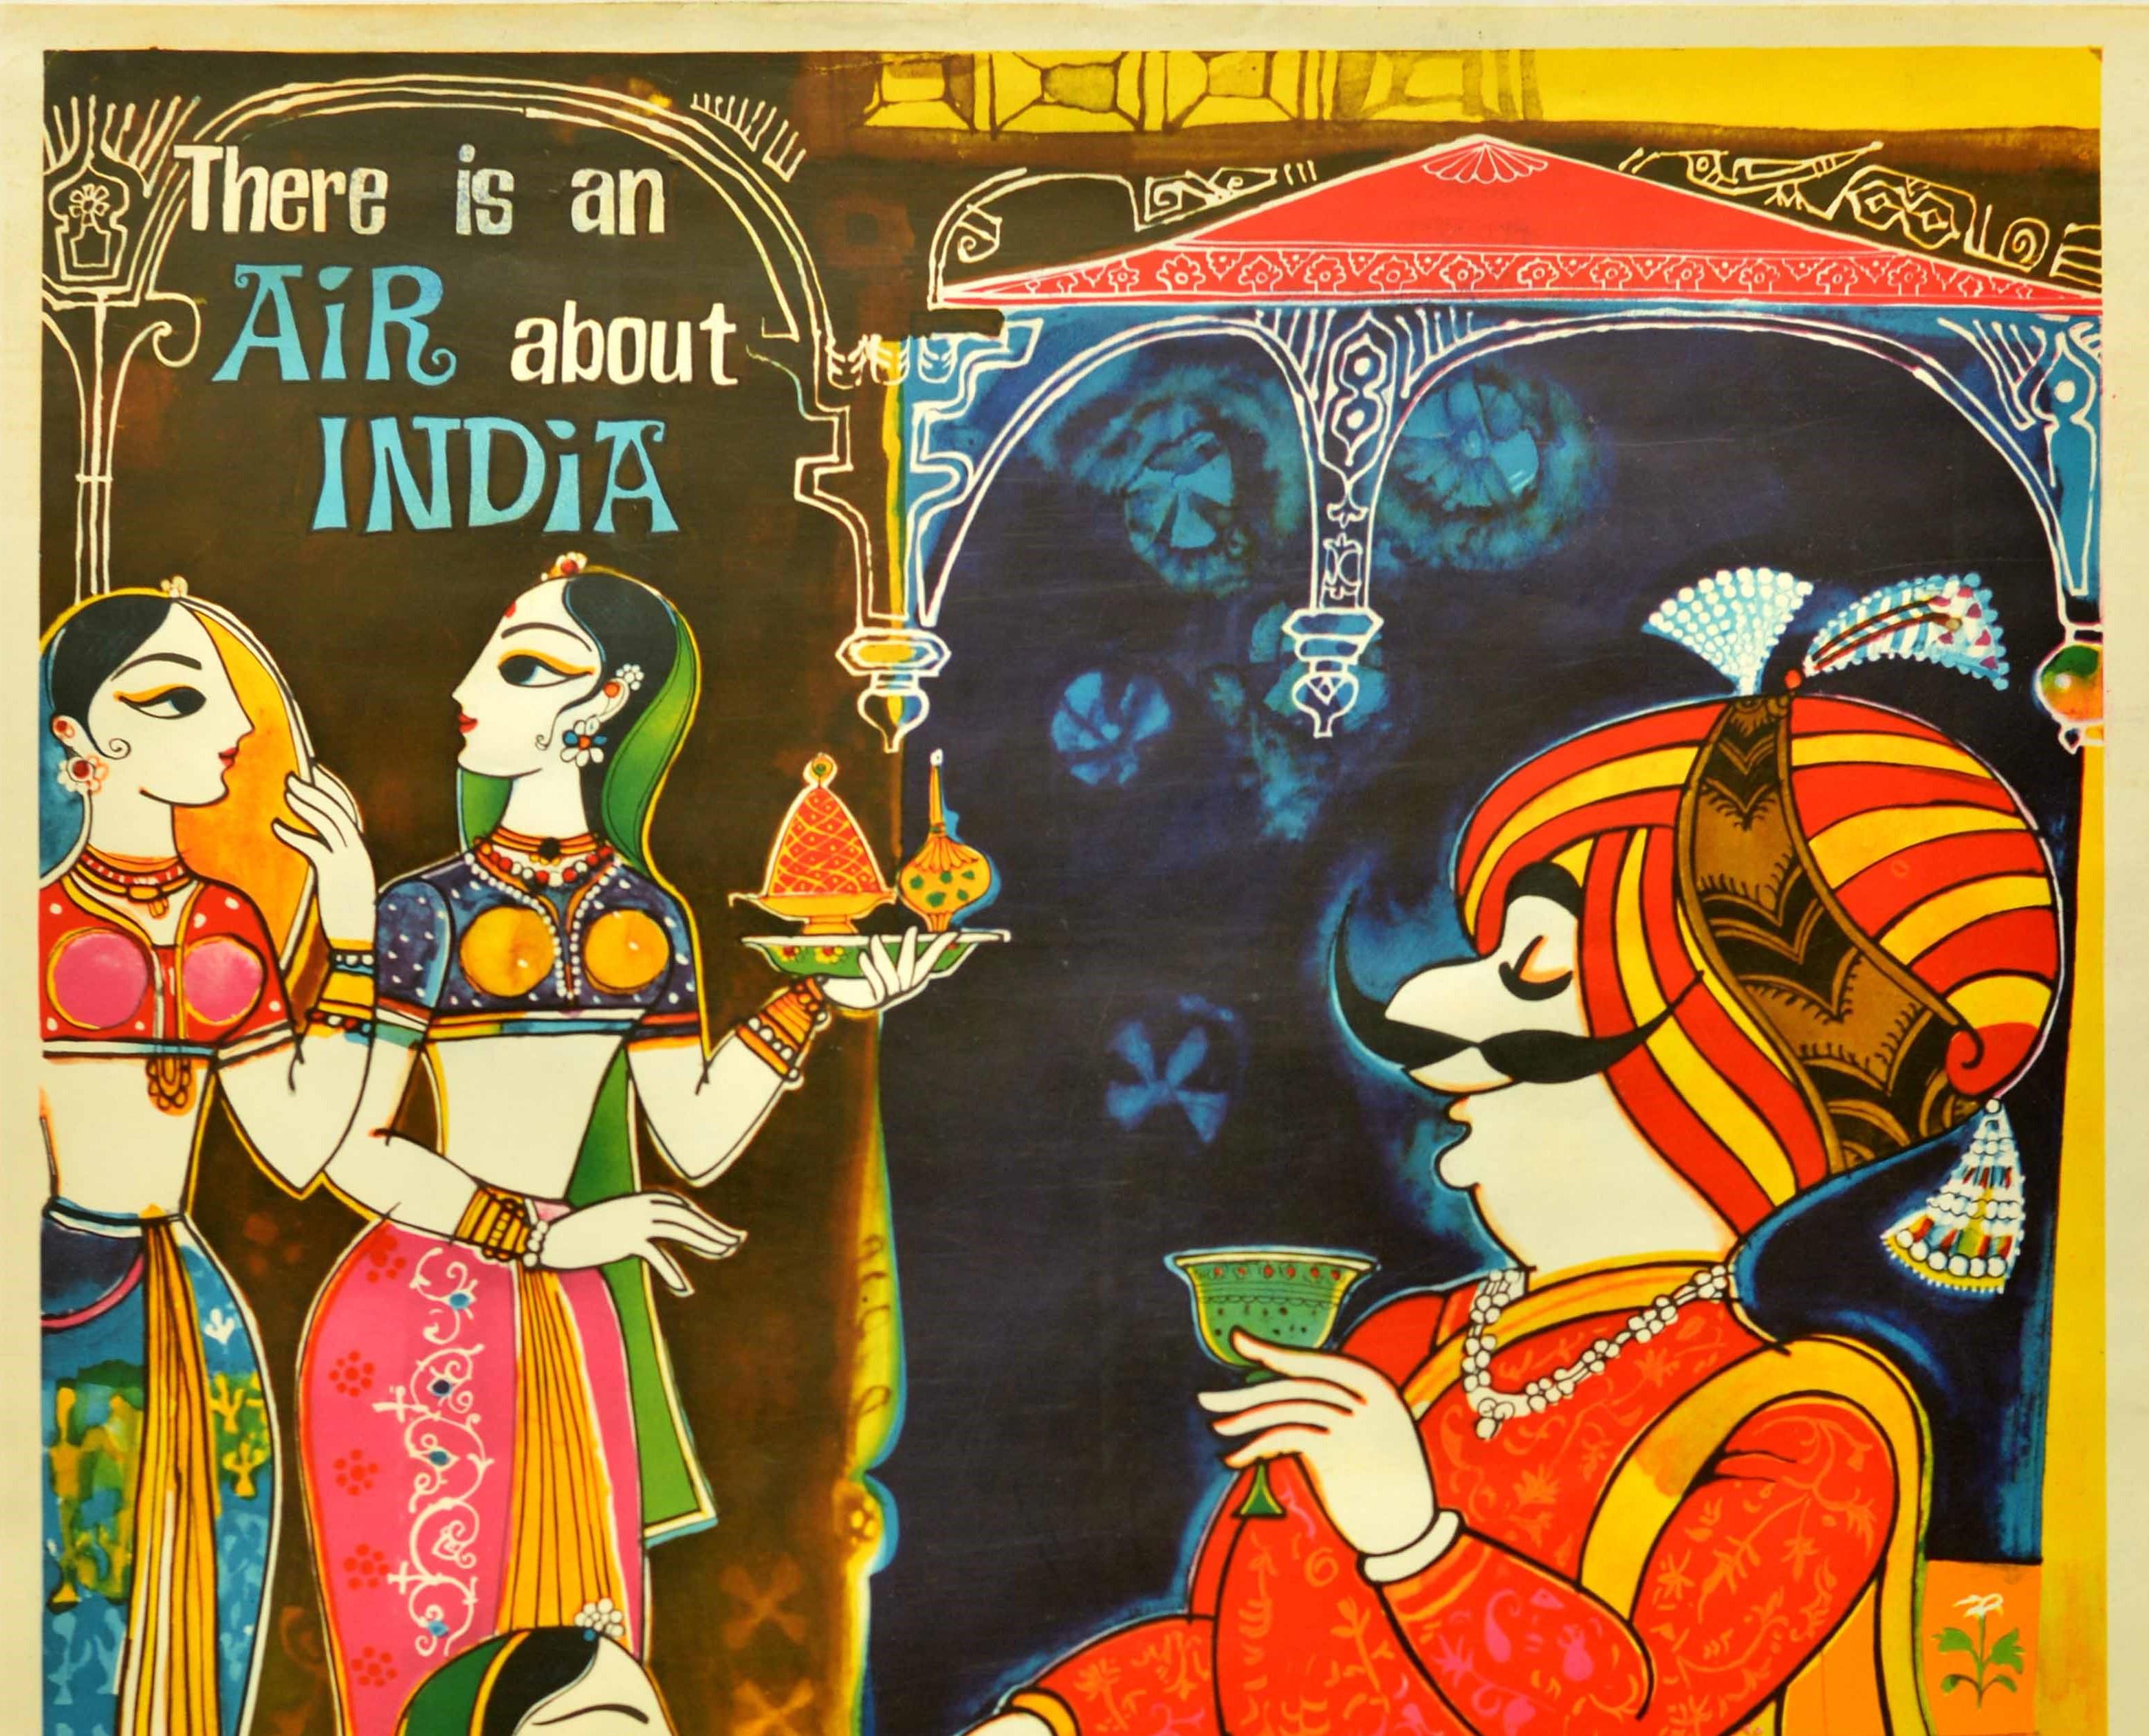 Original vintage travel advertising poster for Air India - There is an air about India - featuring a colourful image of ladies wearing jewellery and traditional sari dresses serving drink to the Air India mascot, a Maharajah (created in 1946 by